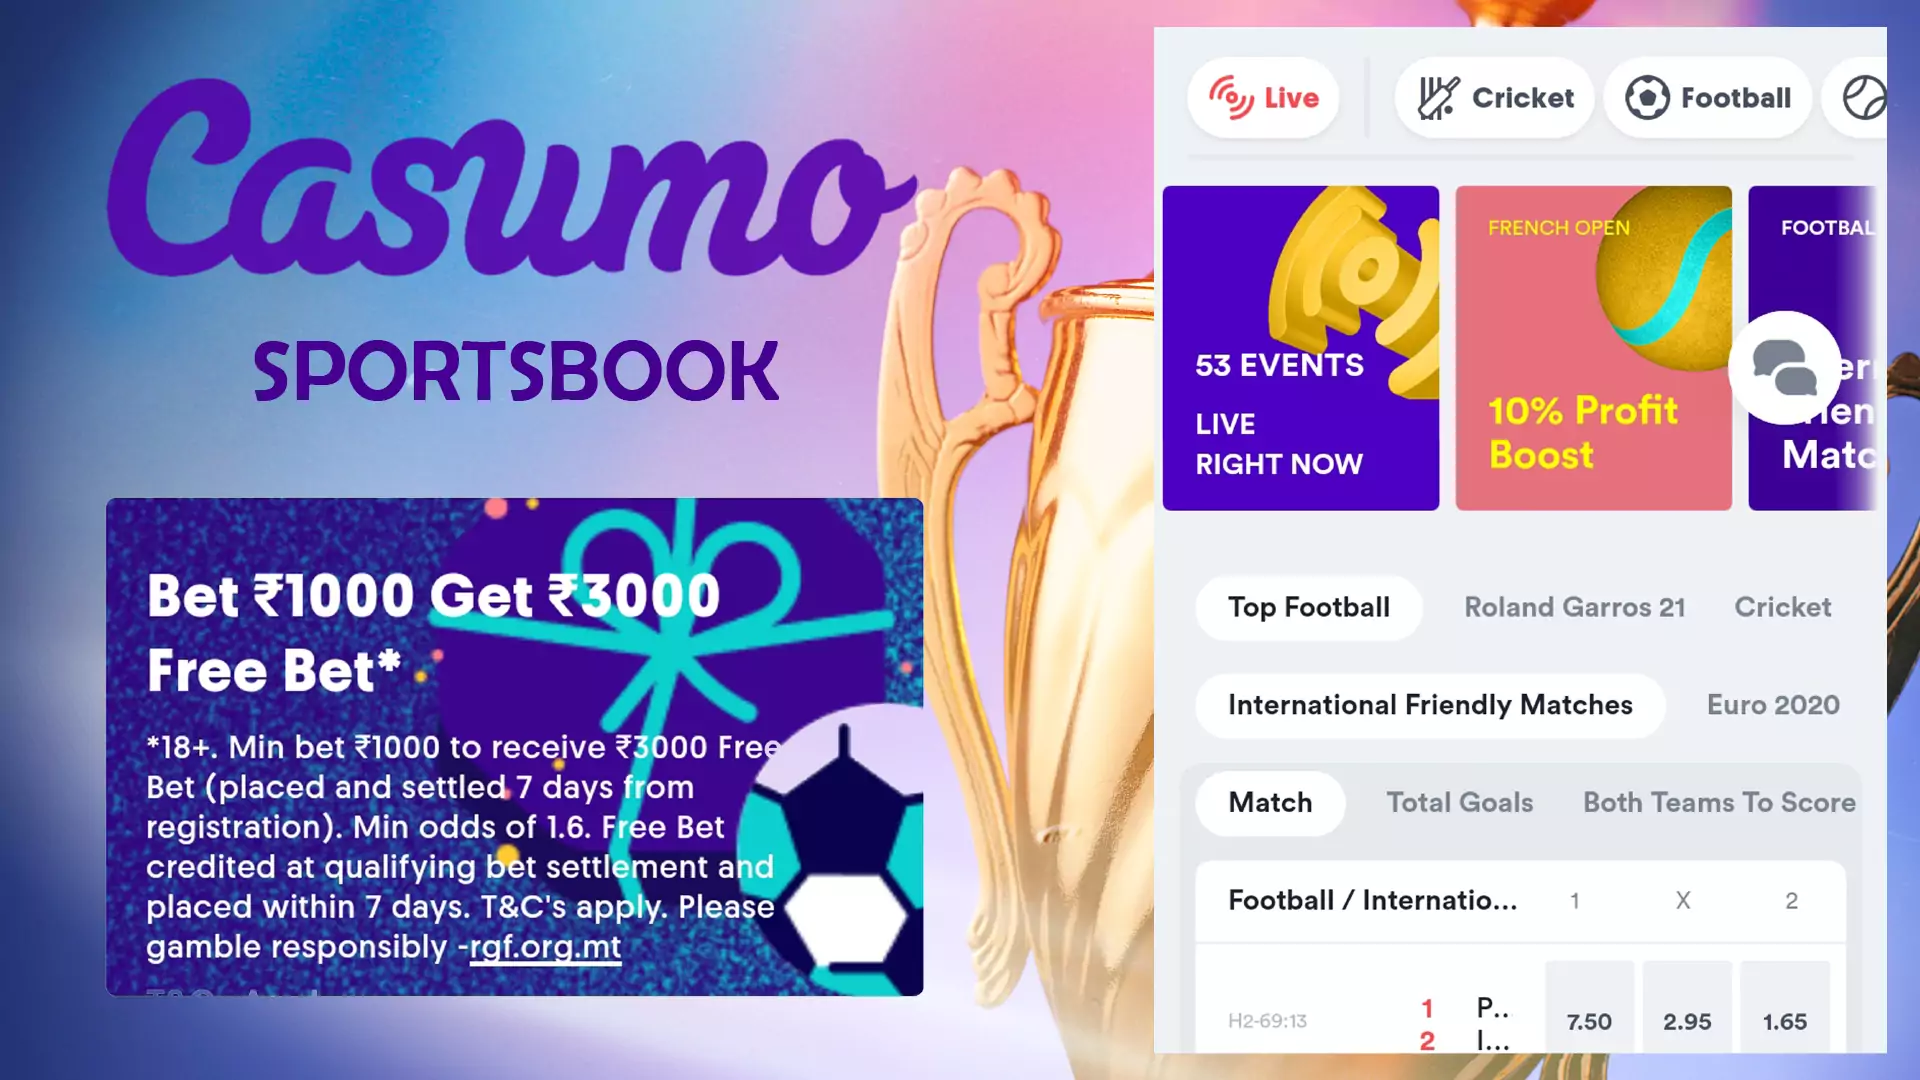 In the Casumo app, users are able to place bets on all popular kinds of sports.